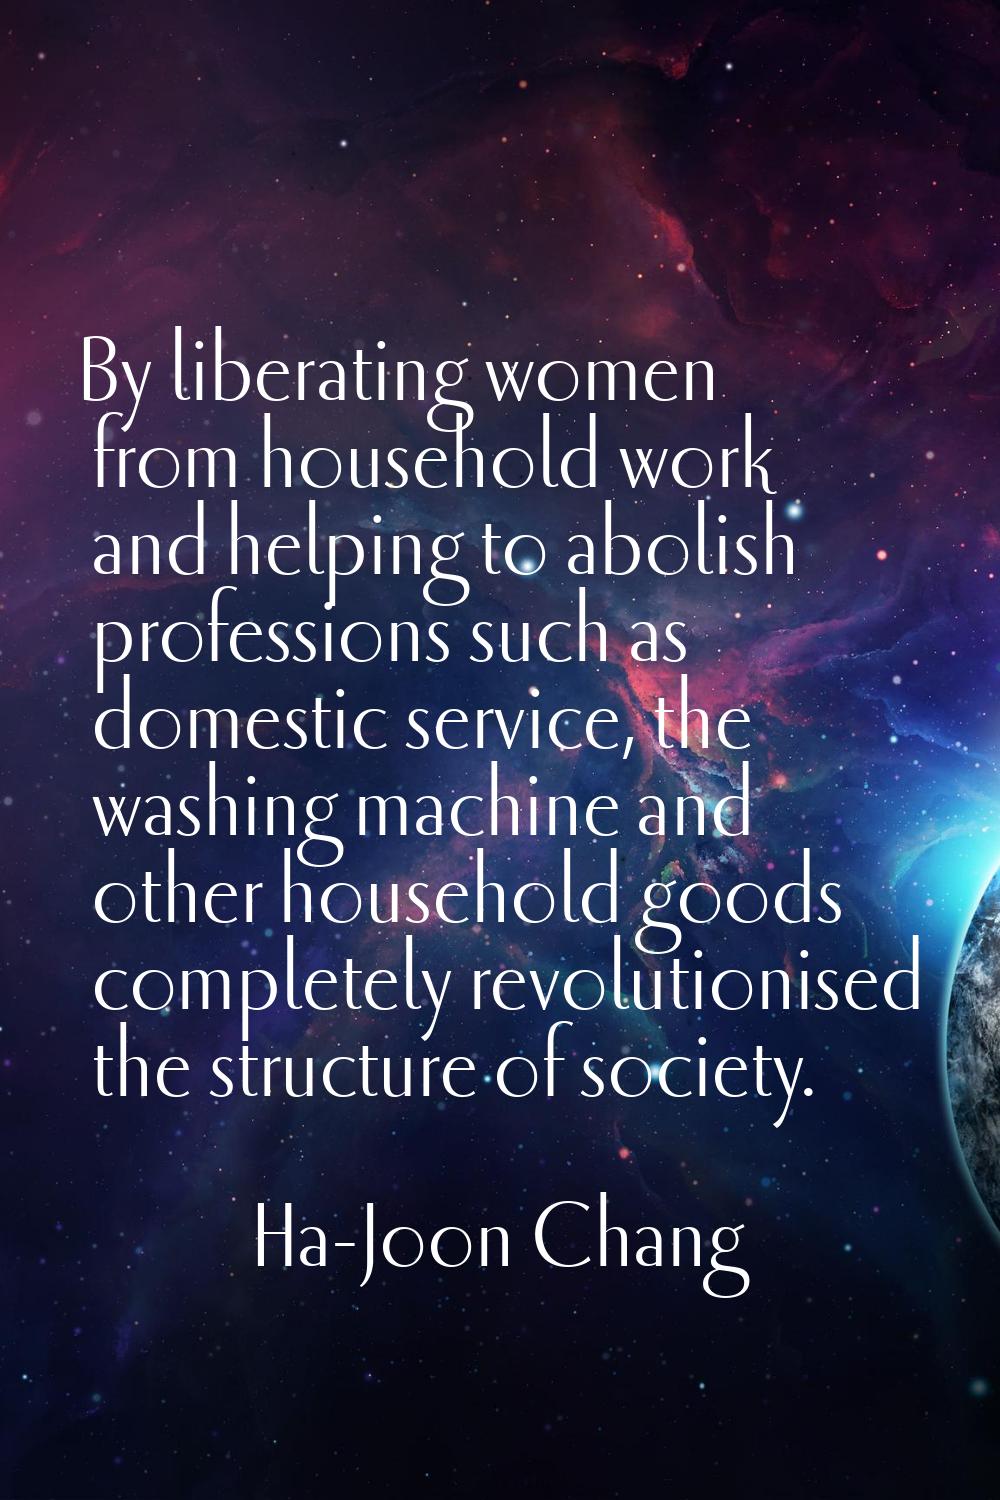 By liberating women from household work and helping to abolish professions such as domestic service